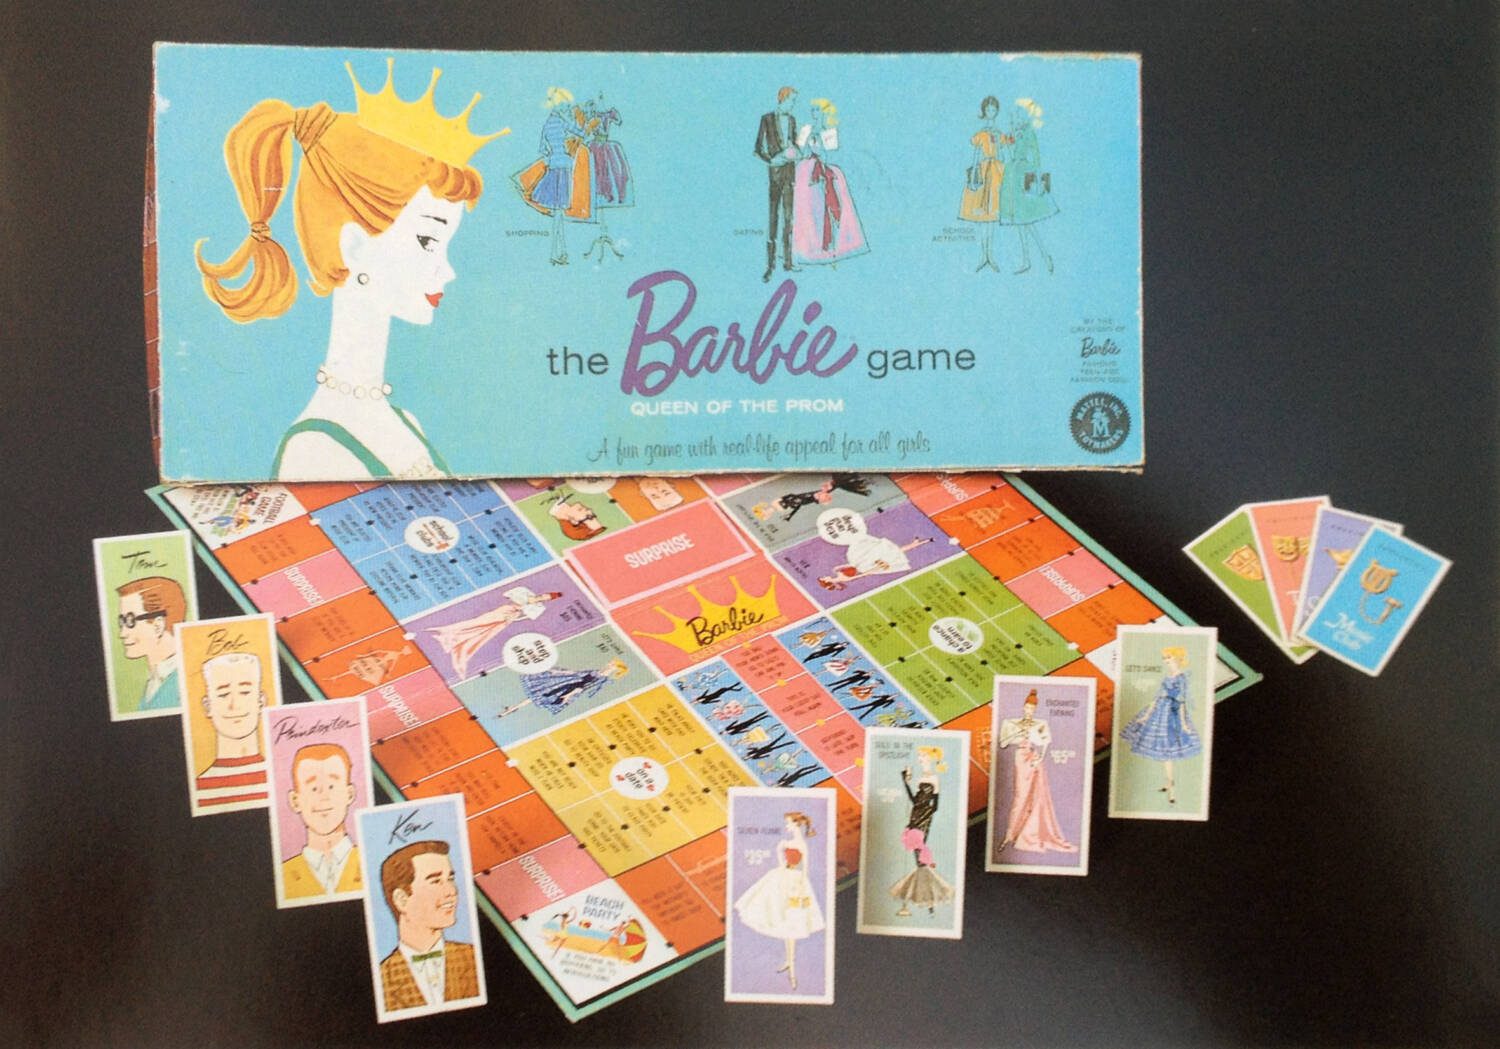 Barbie, Queen of the Prom: A fun game with real life appeal for all girls.